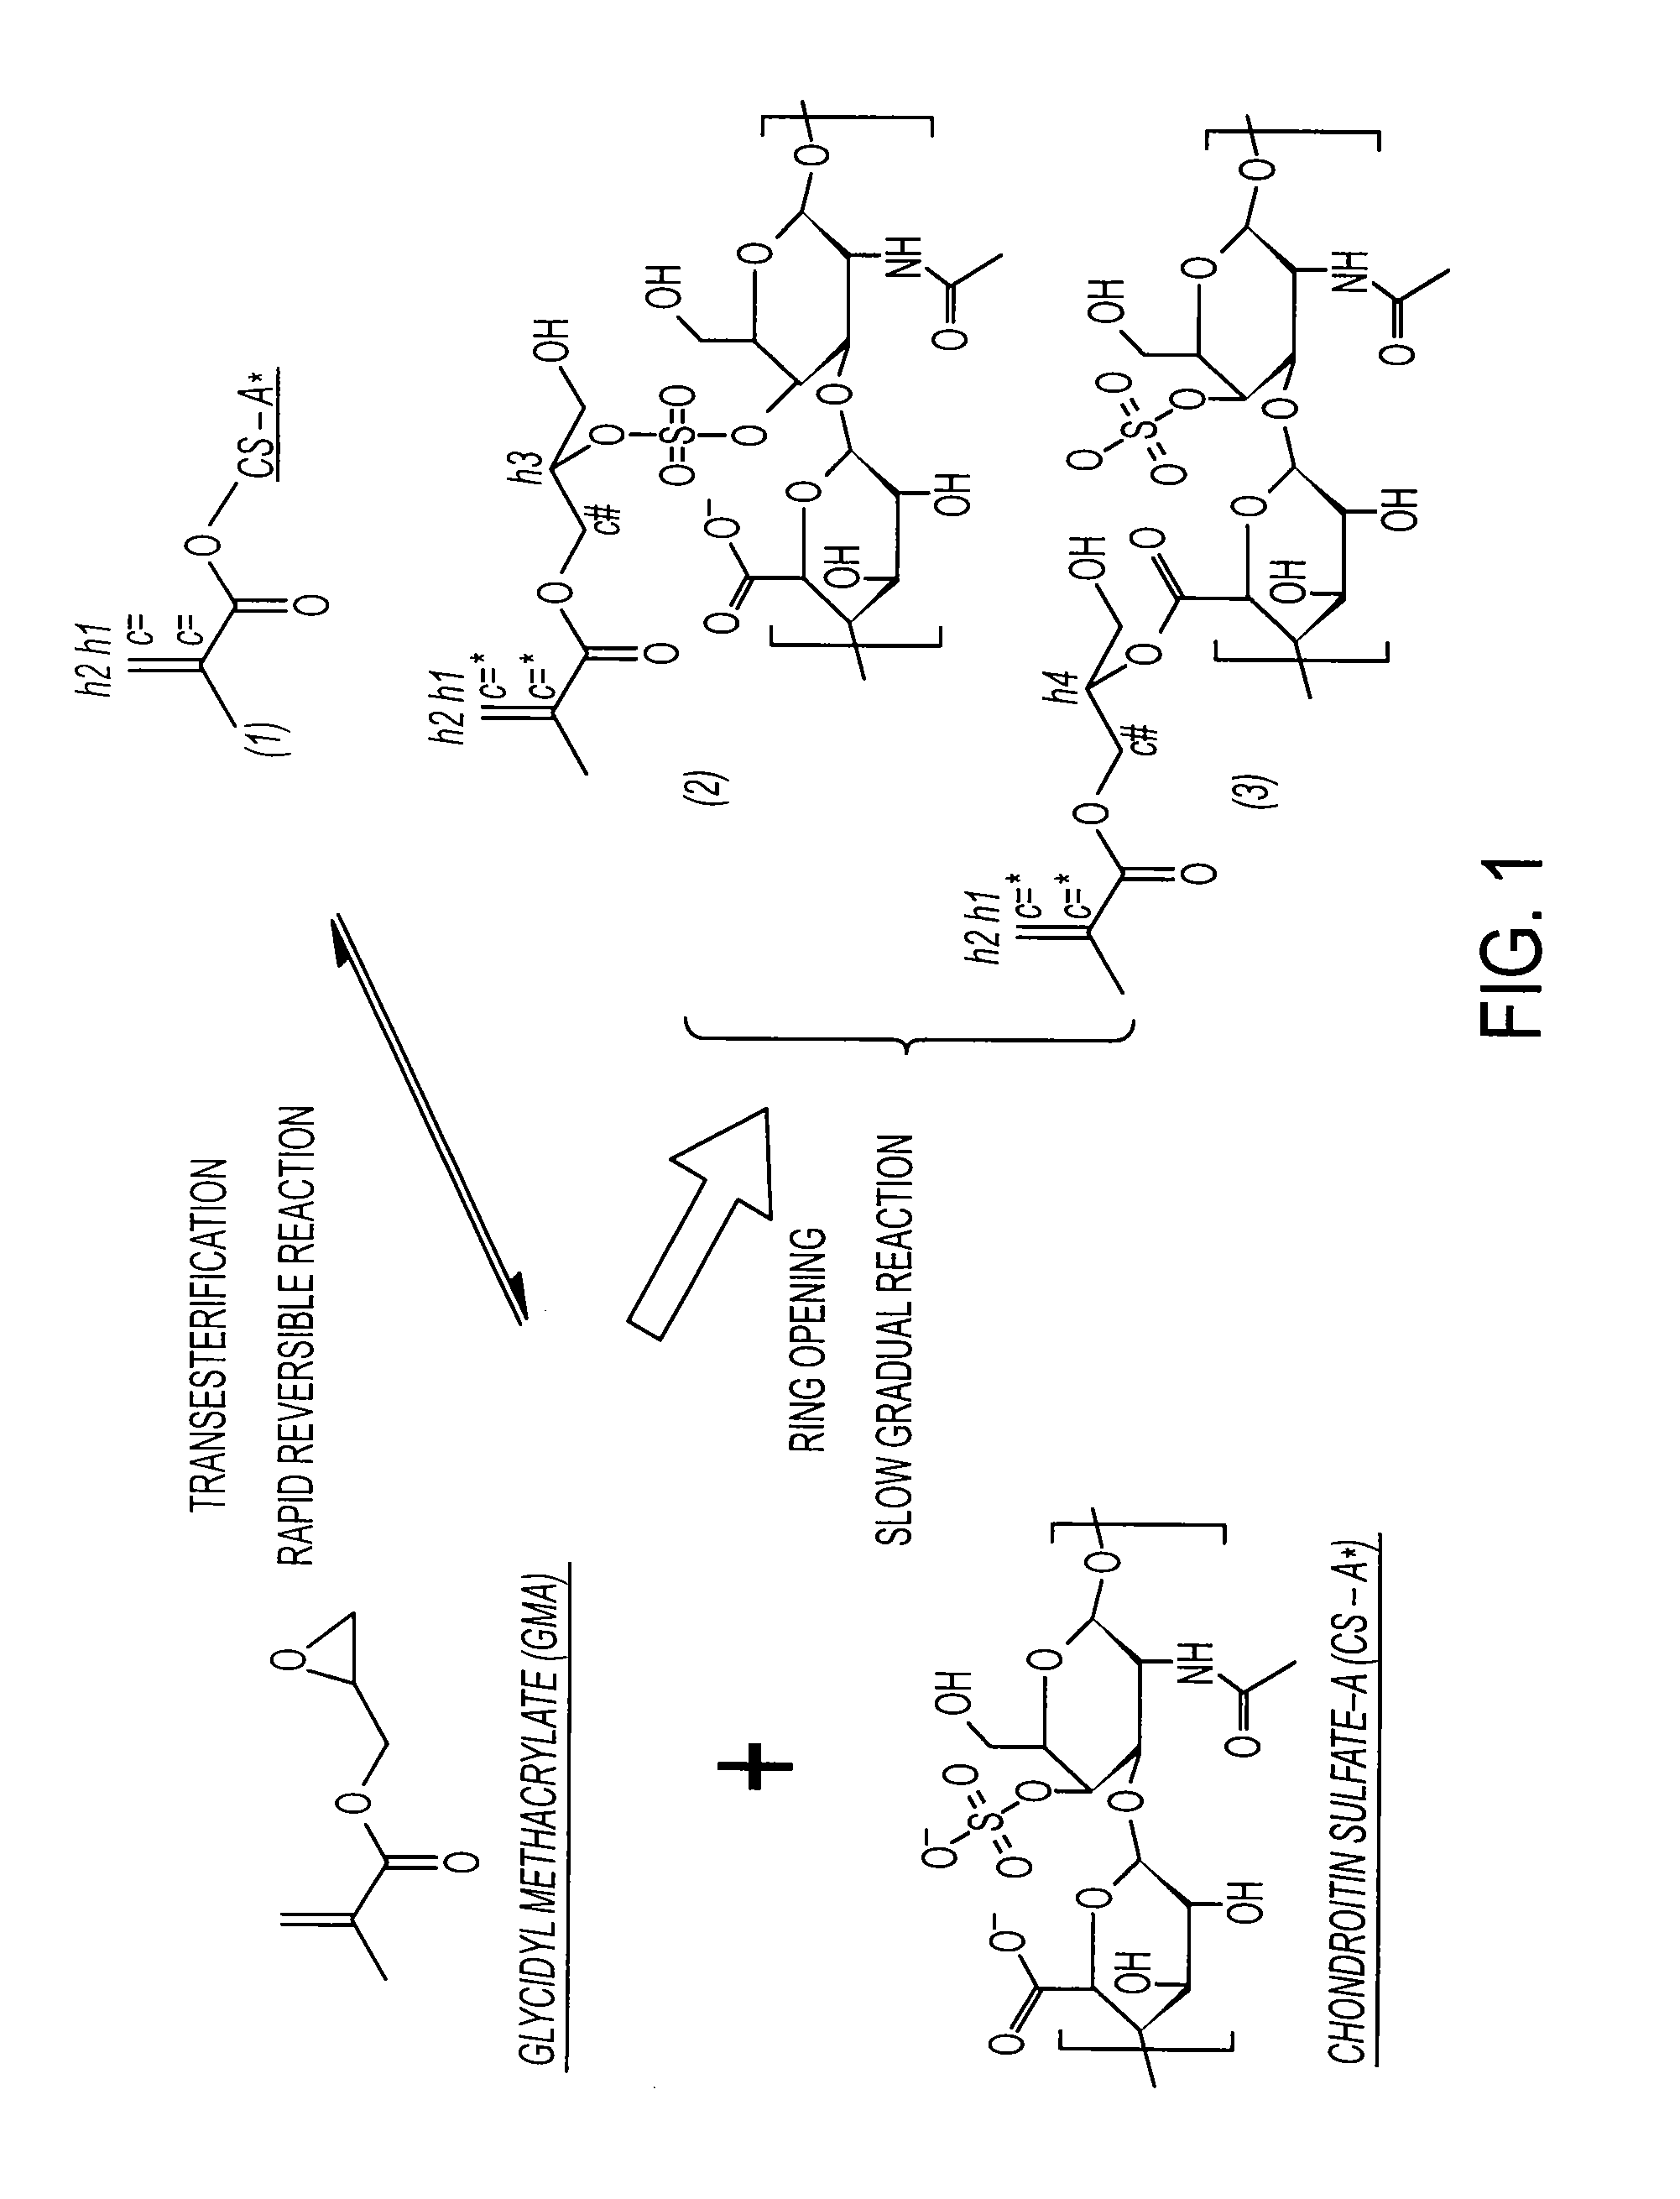 Cross-linked polymer matrices, and methods of making and using same